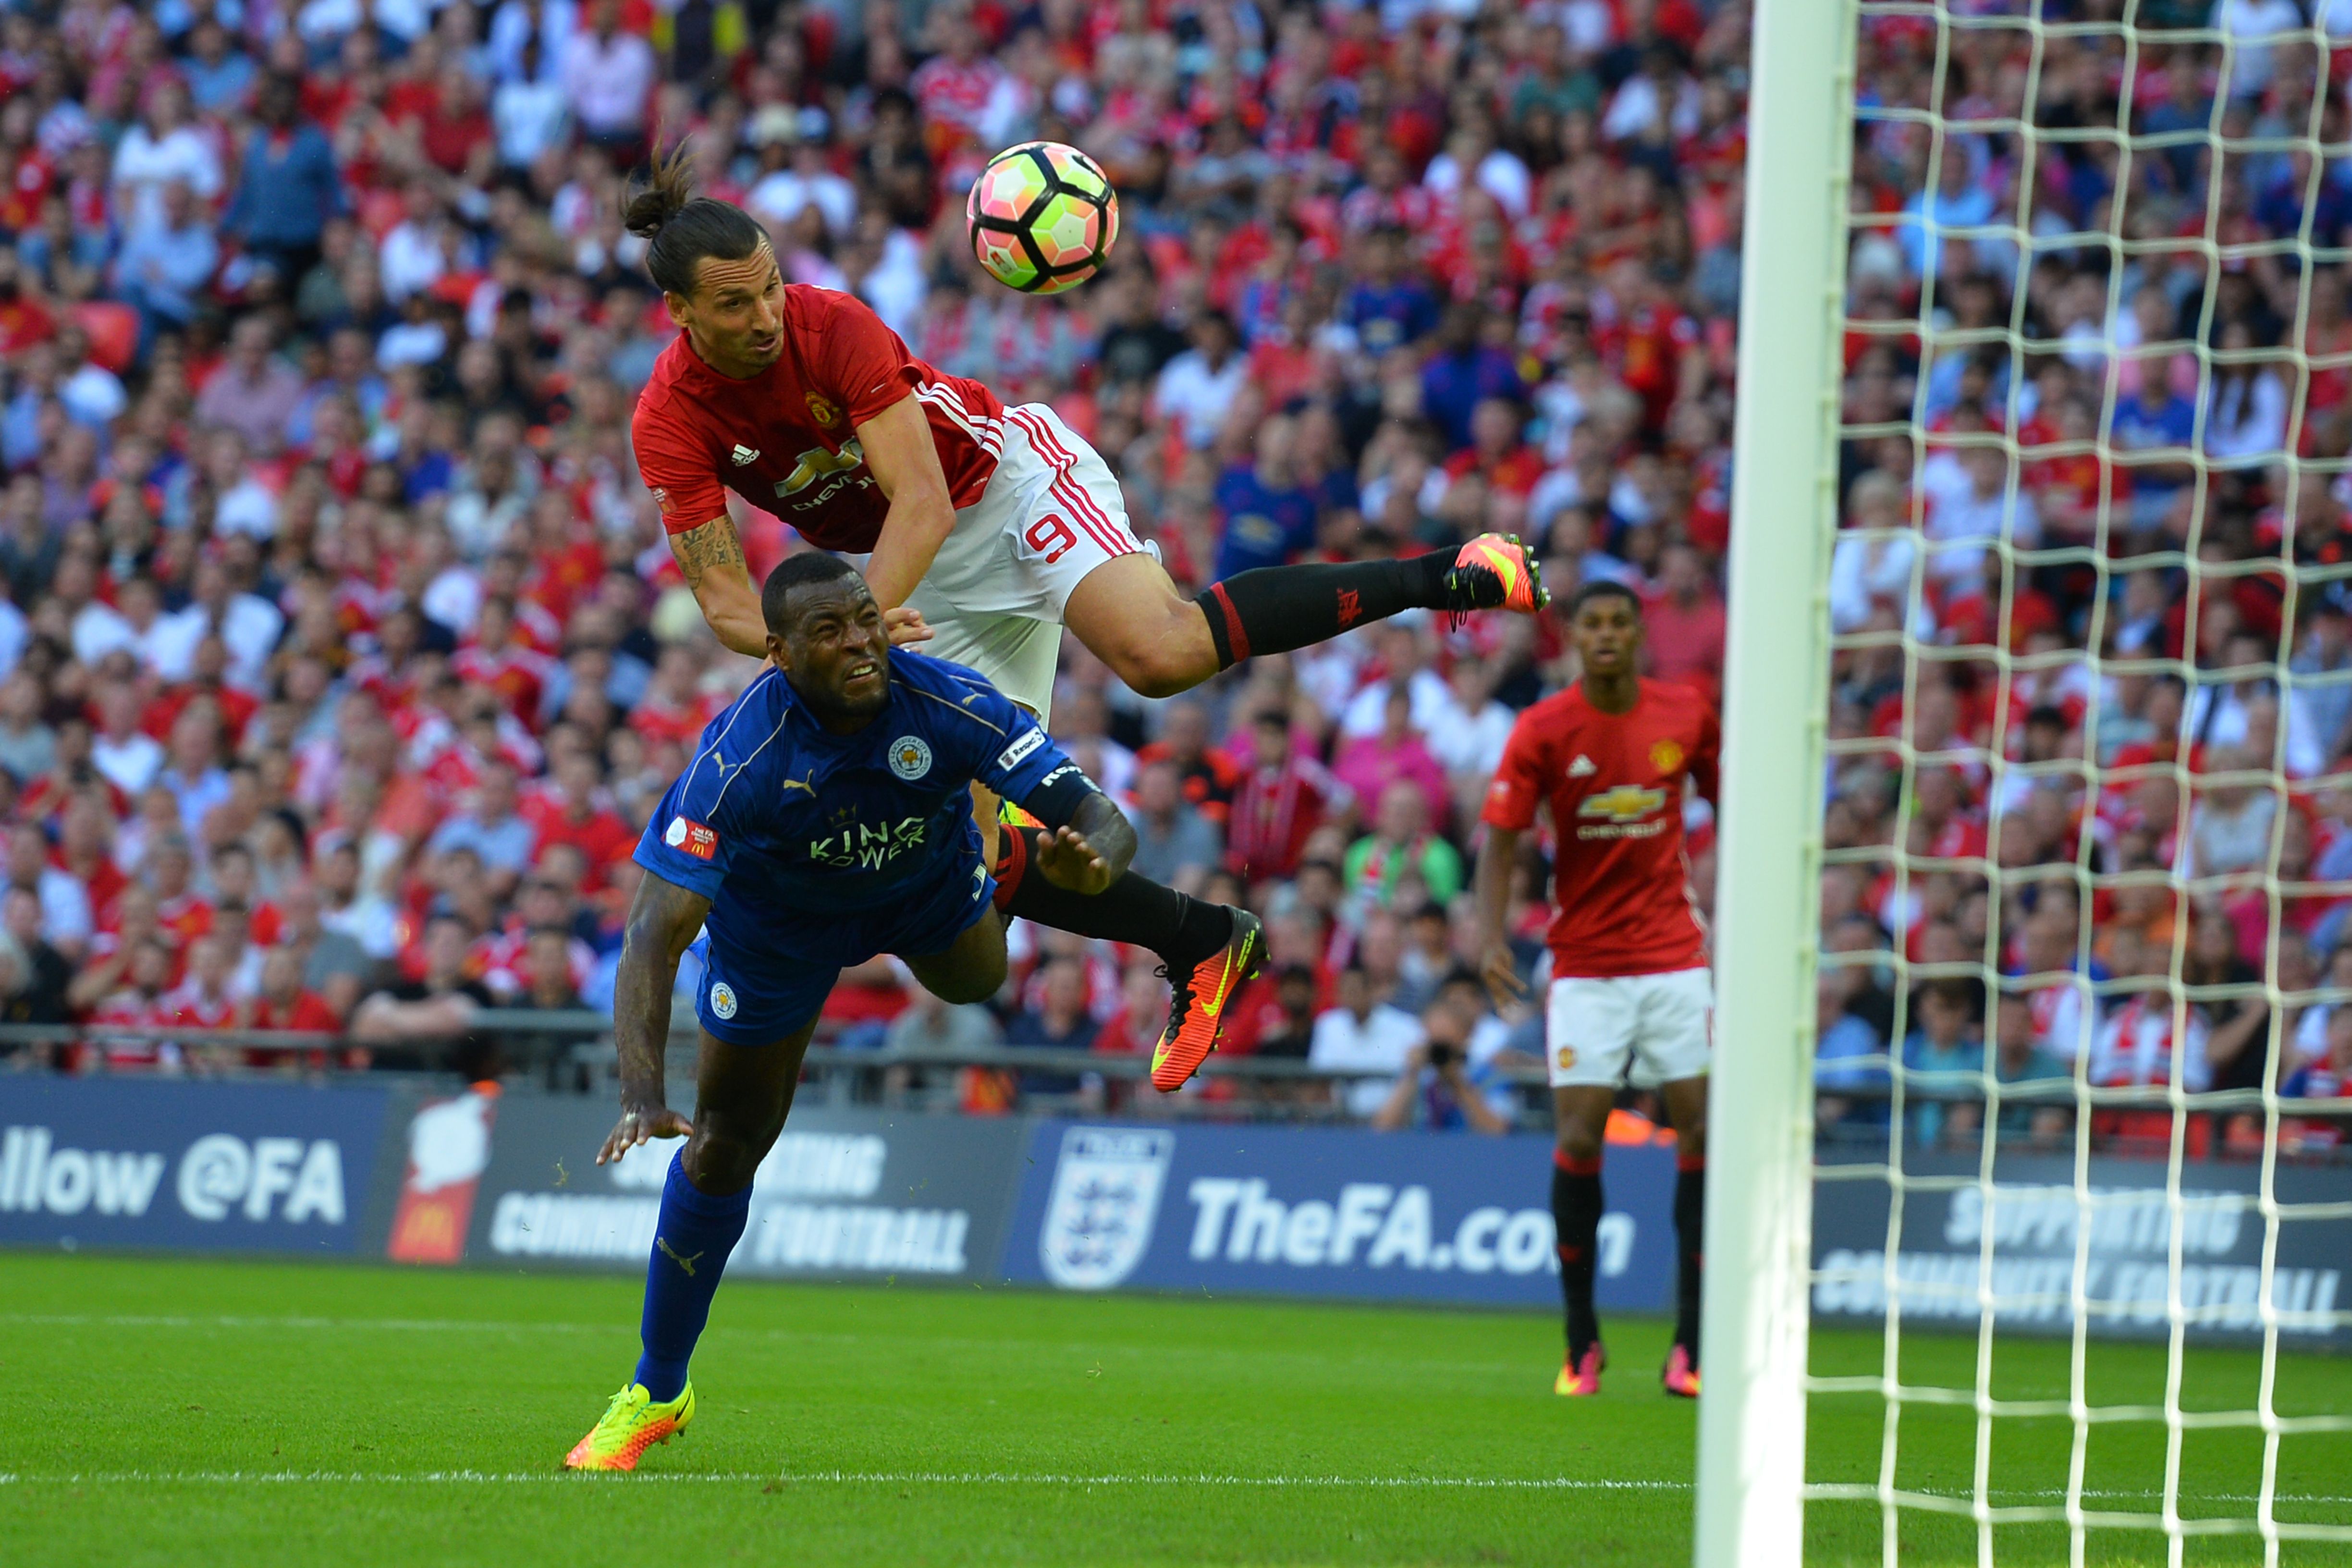 Wes Morgan was outdone by Zlatan as he towered above the strong defender to slot home United's winner. (Picture Courtesy - AFP/Getty Images)